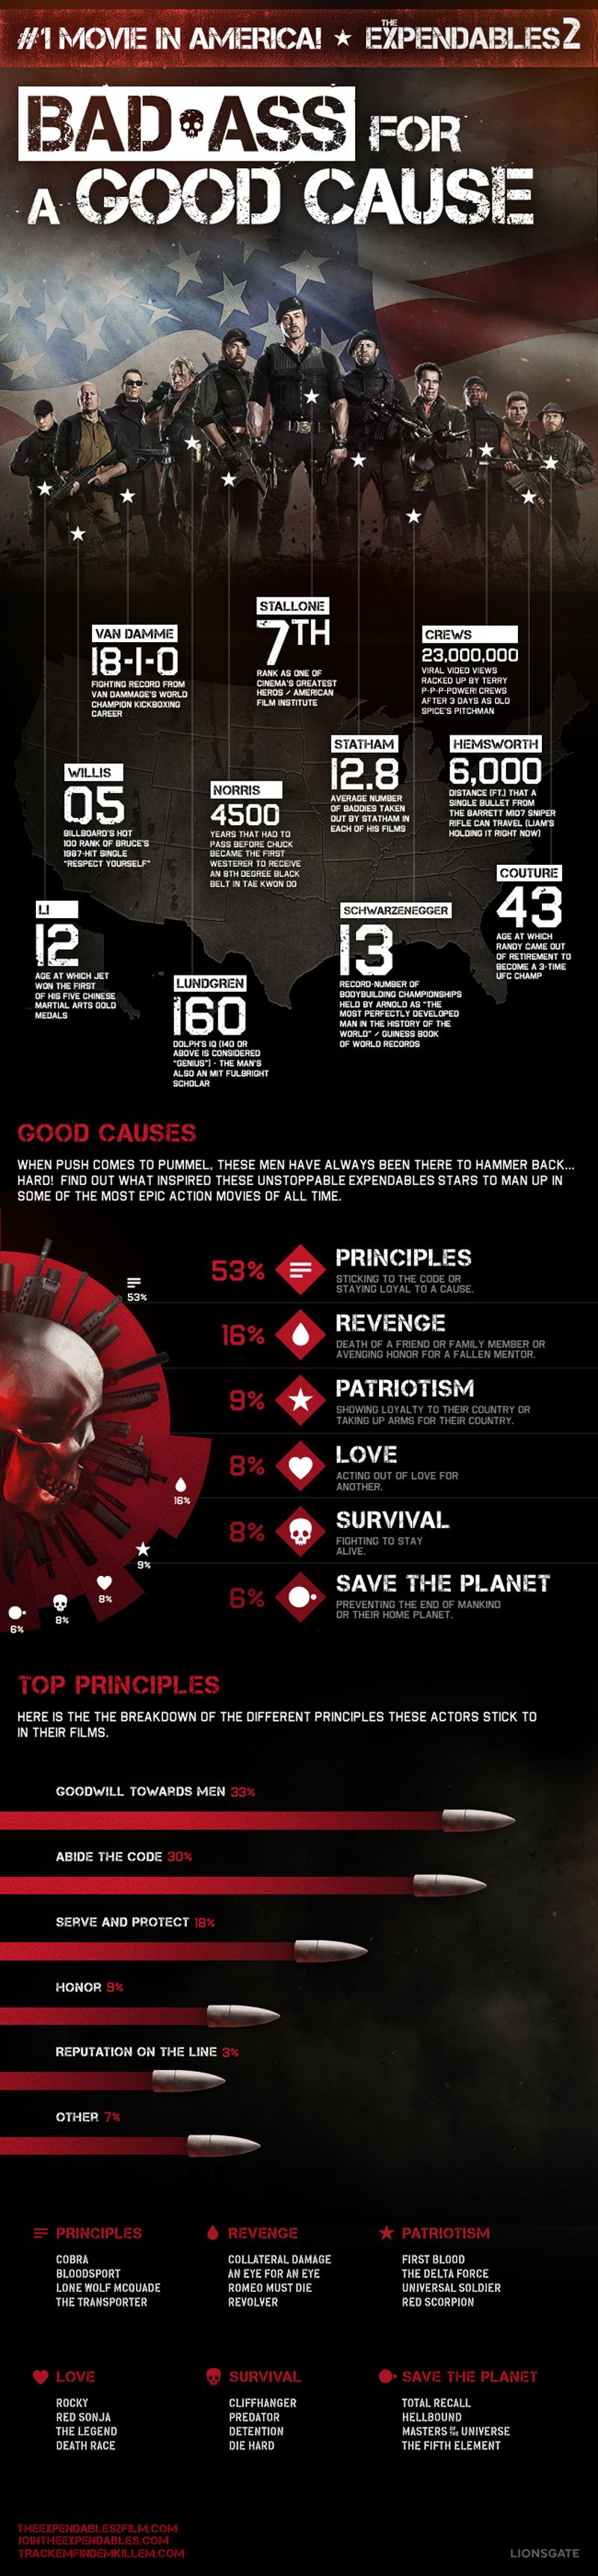 The Expendables 2 Bad Ass for A Good Cause Inforgraphic